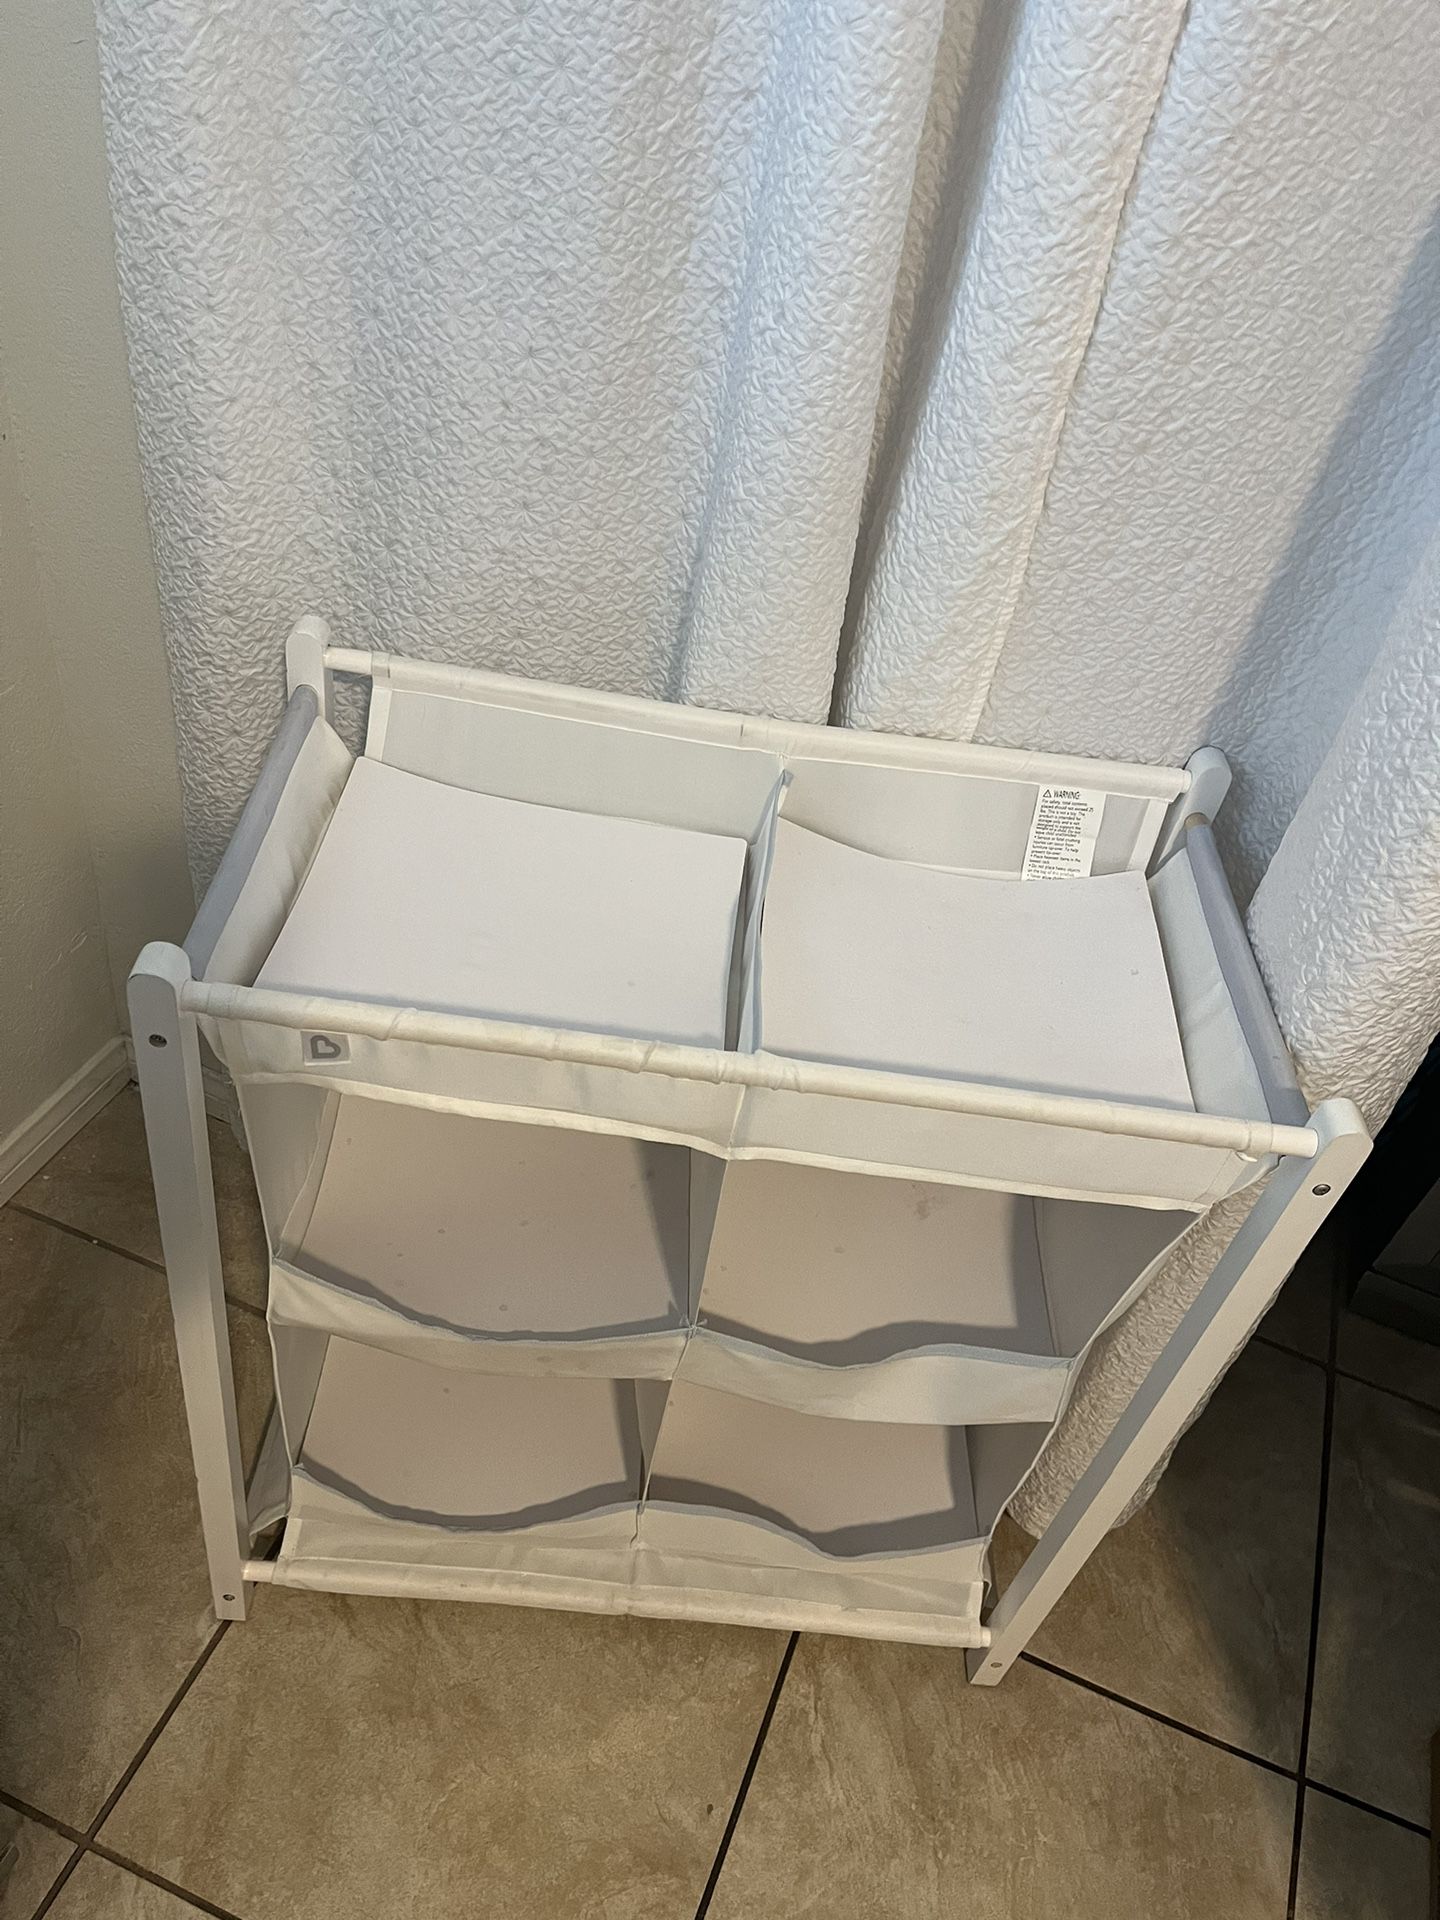 New] Munchkin Baby Food Organizer for Sale in Long Beach, CA - OfferUp